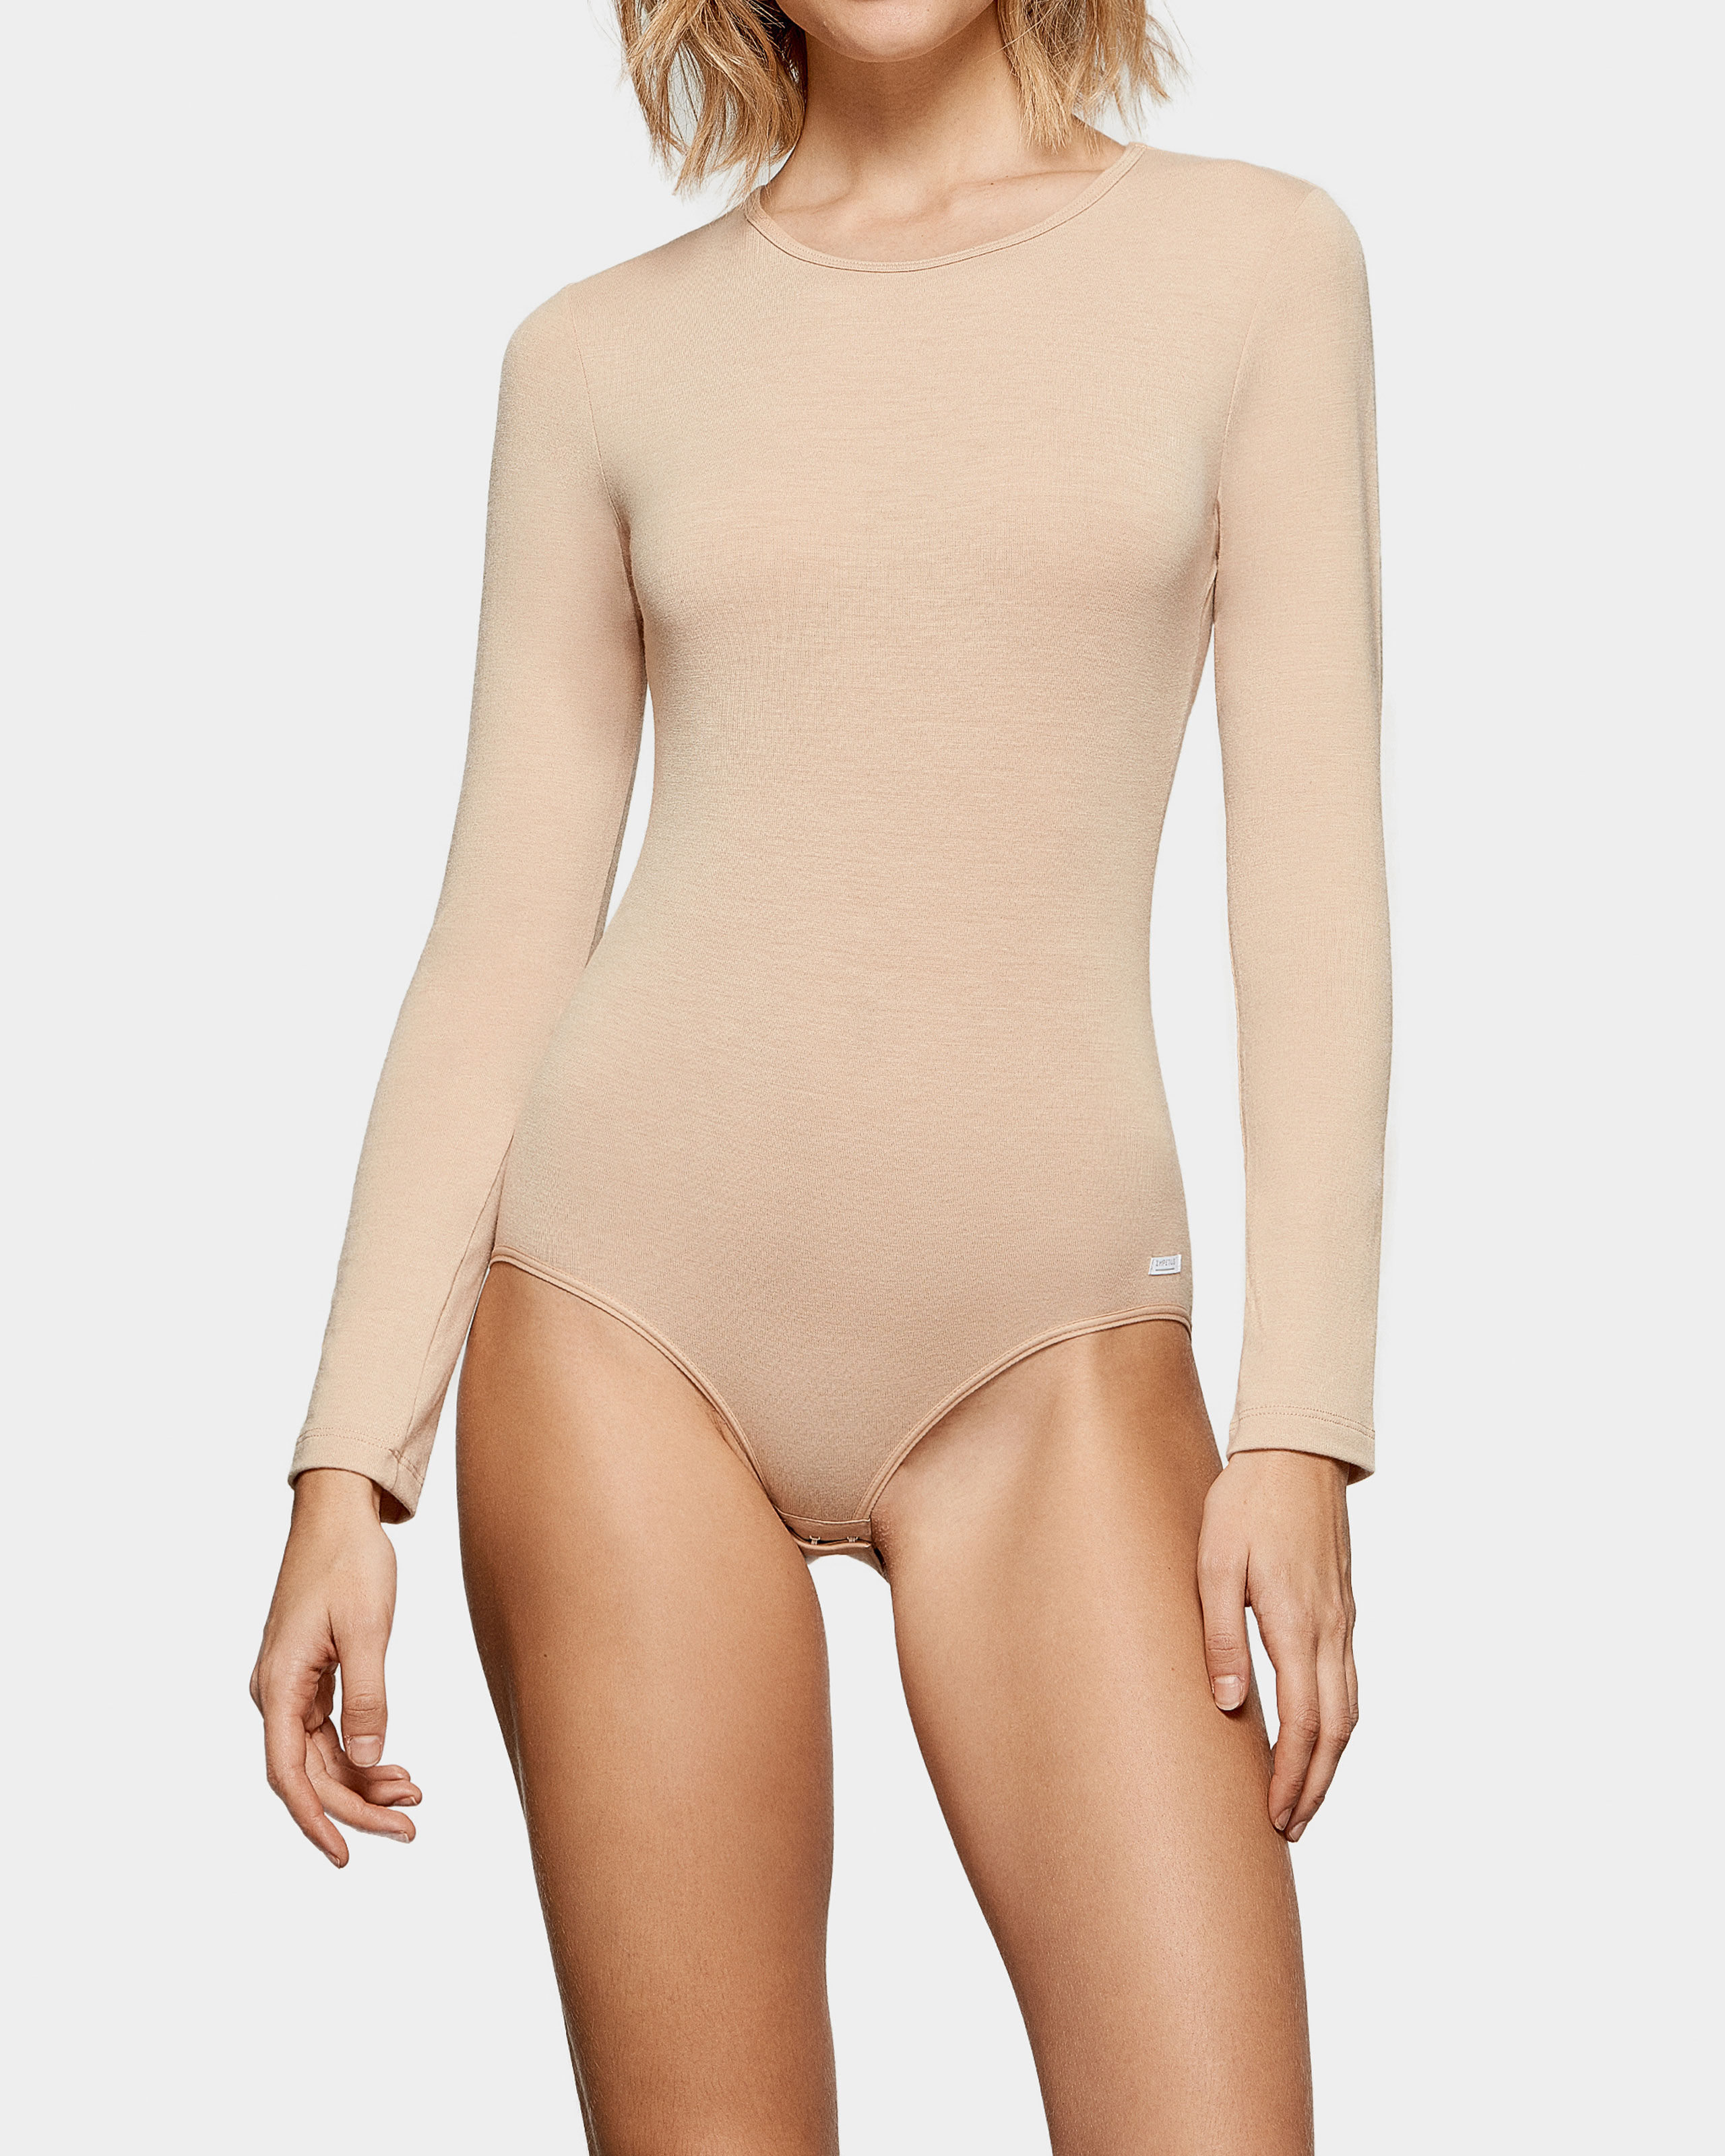 IMPETUS Body de mujer Thermo Beige (L)